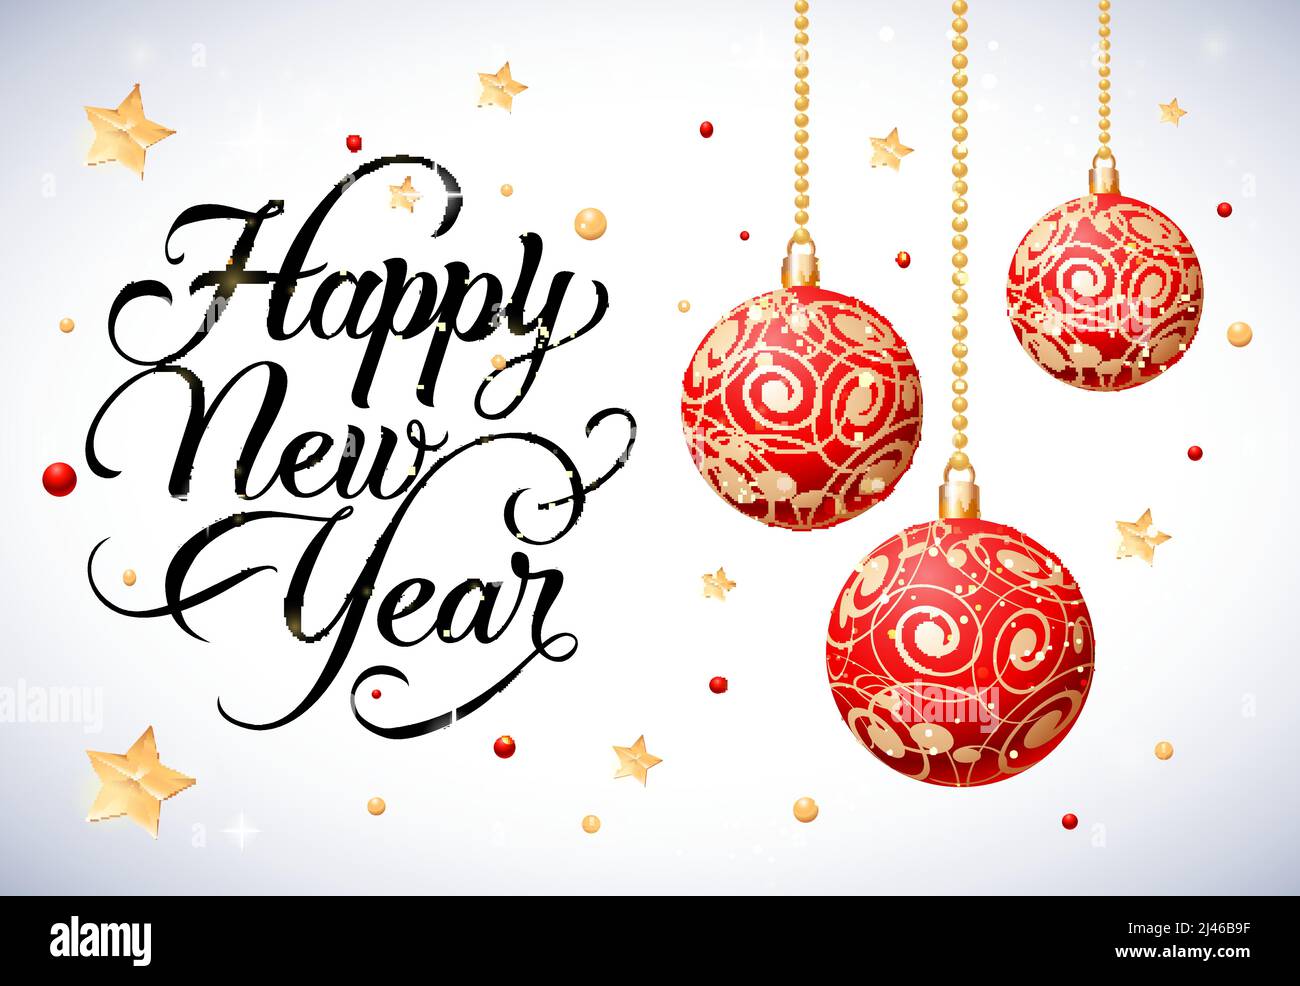 Happy New Year lettering with hanging balls. Calligraphic inscription can be used for greeting card, festive design, posters, banners. Stock Vector